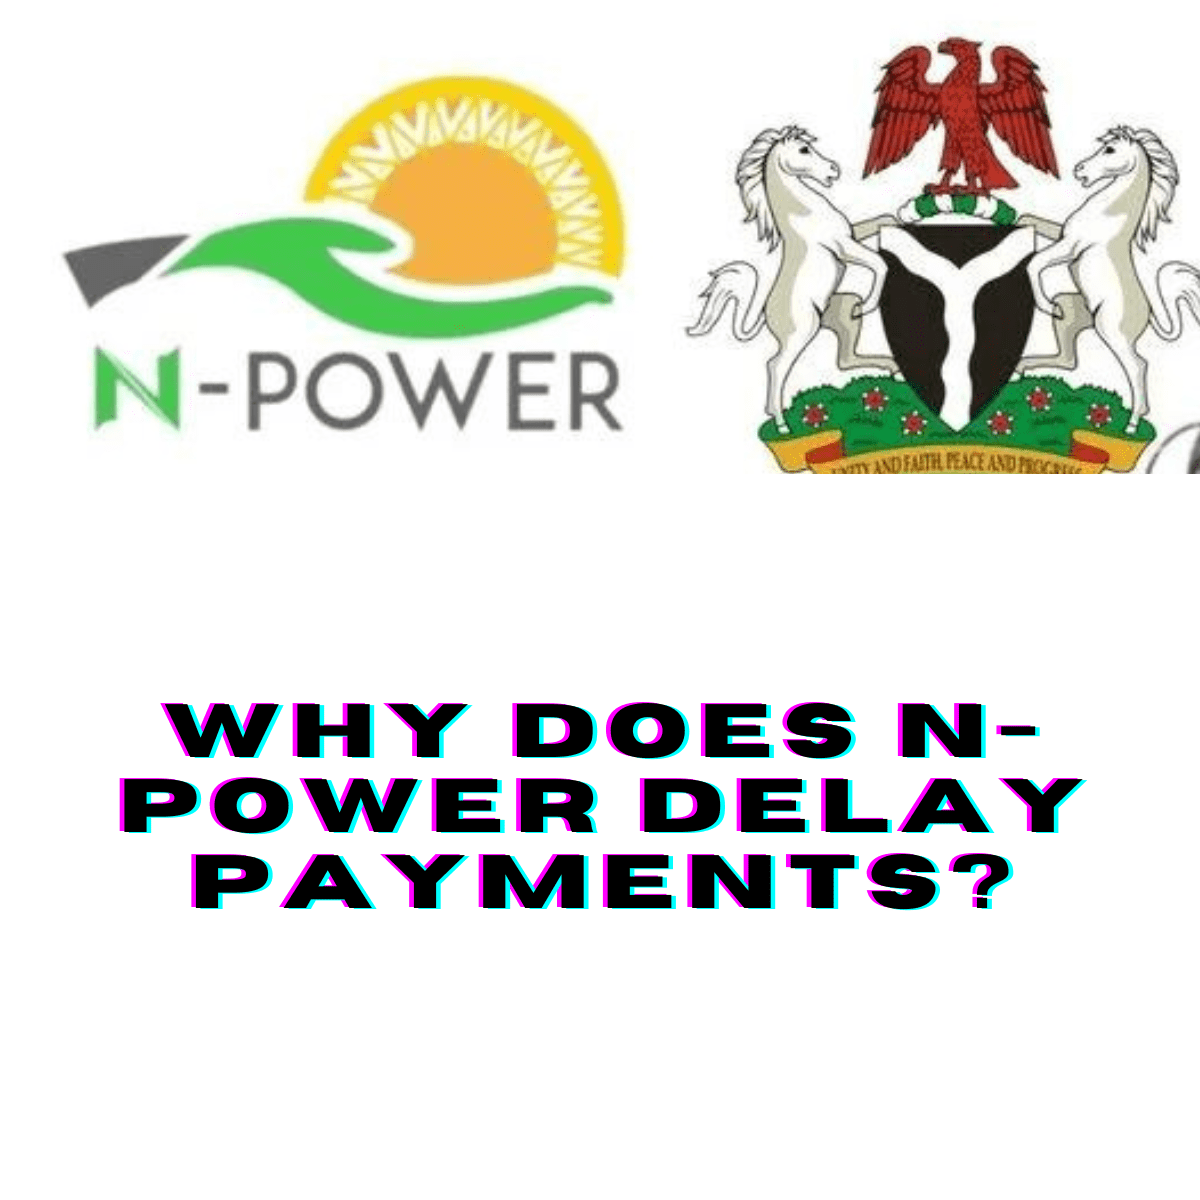 Why Does N Power Delay Payments